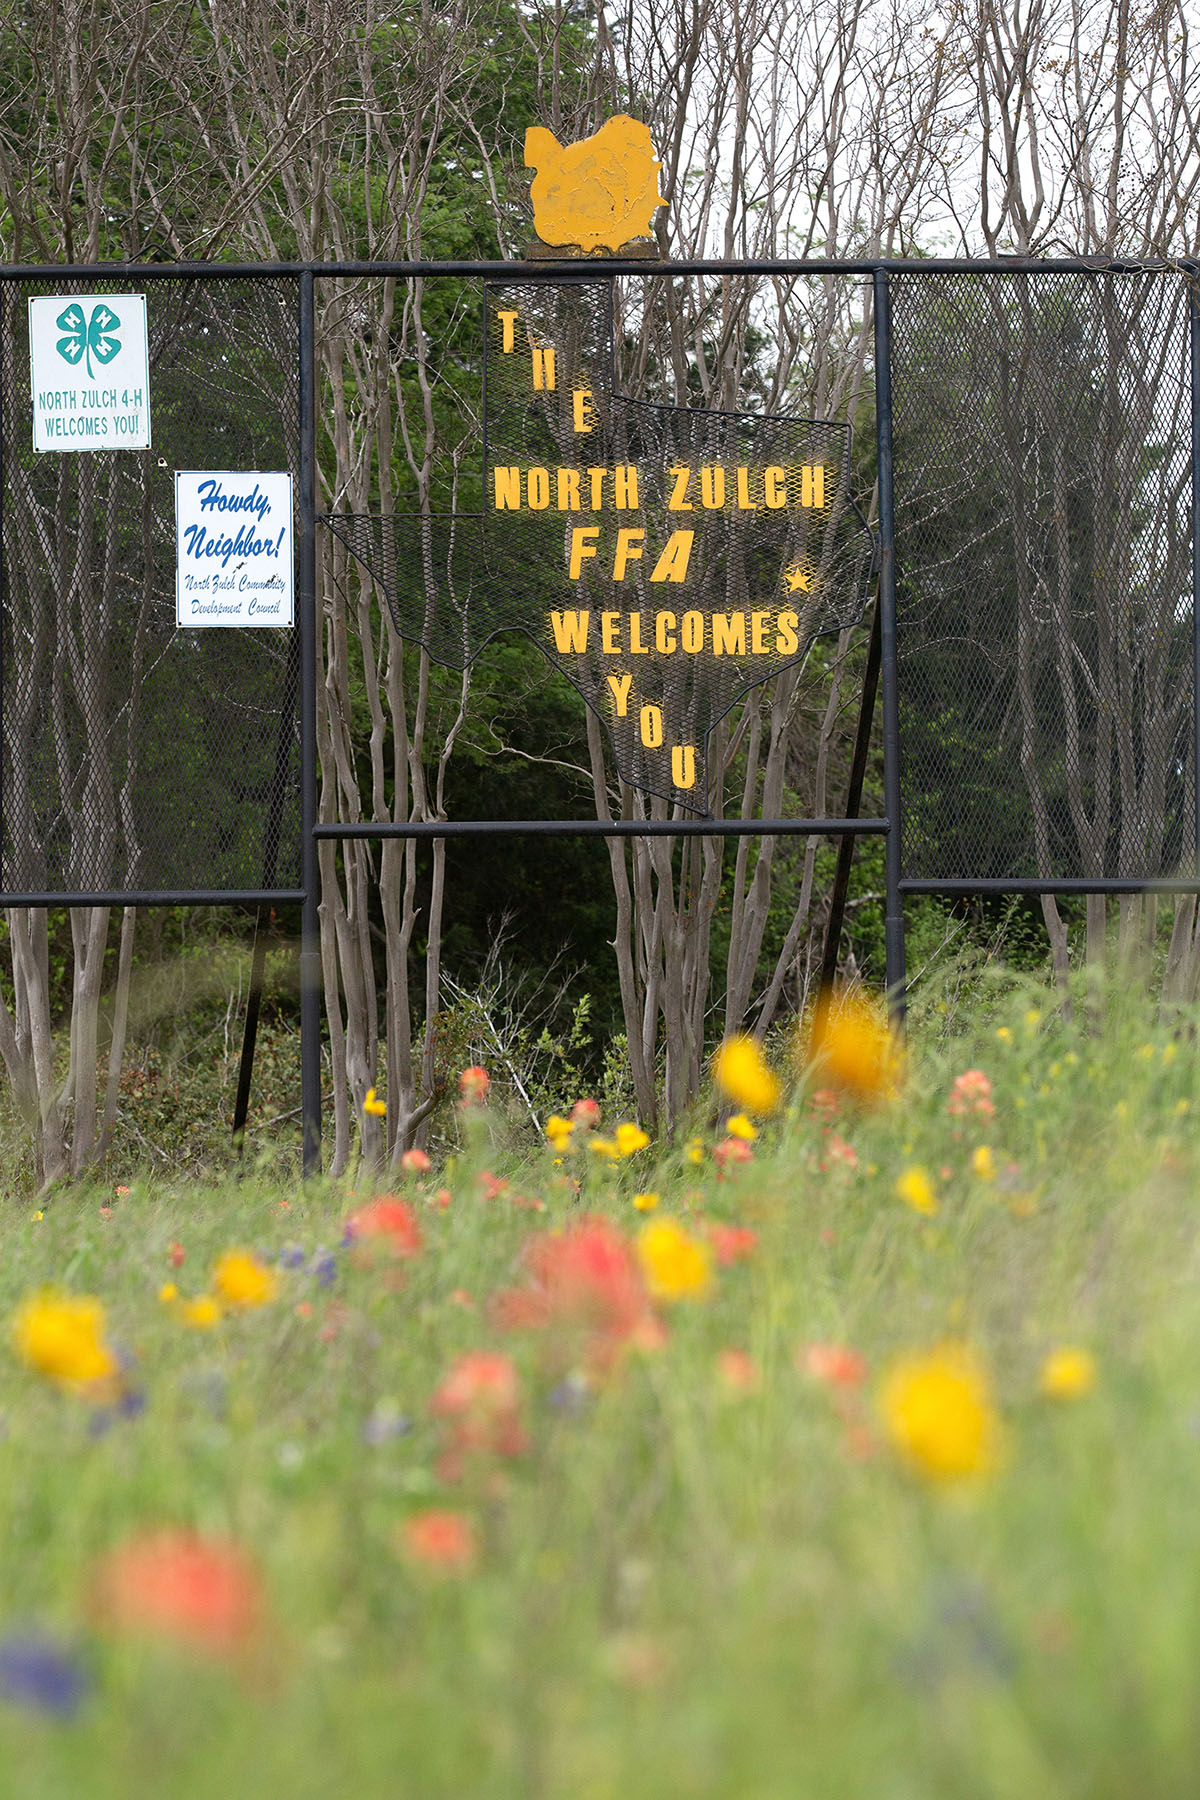 A field of wildflowers in front of a fence with a sign reading "The North Zulch FFA Welcomes You"